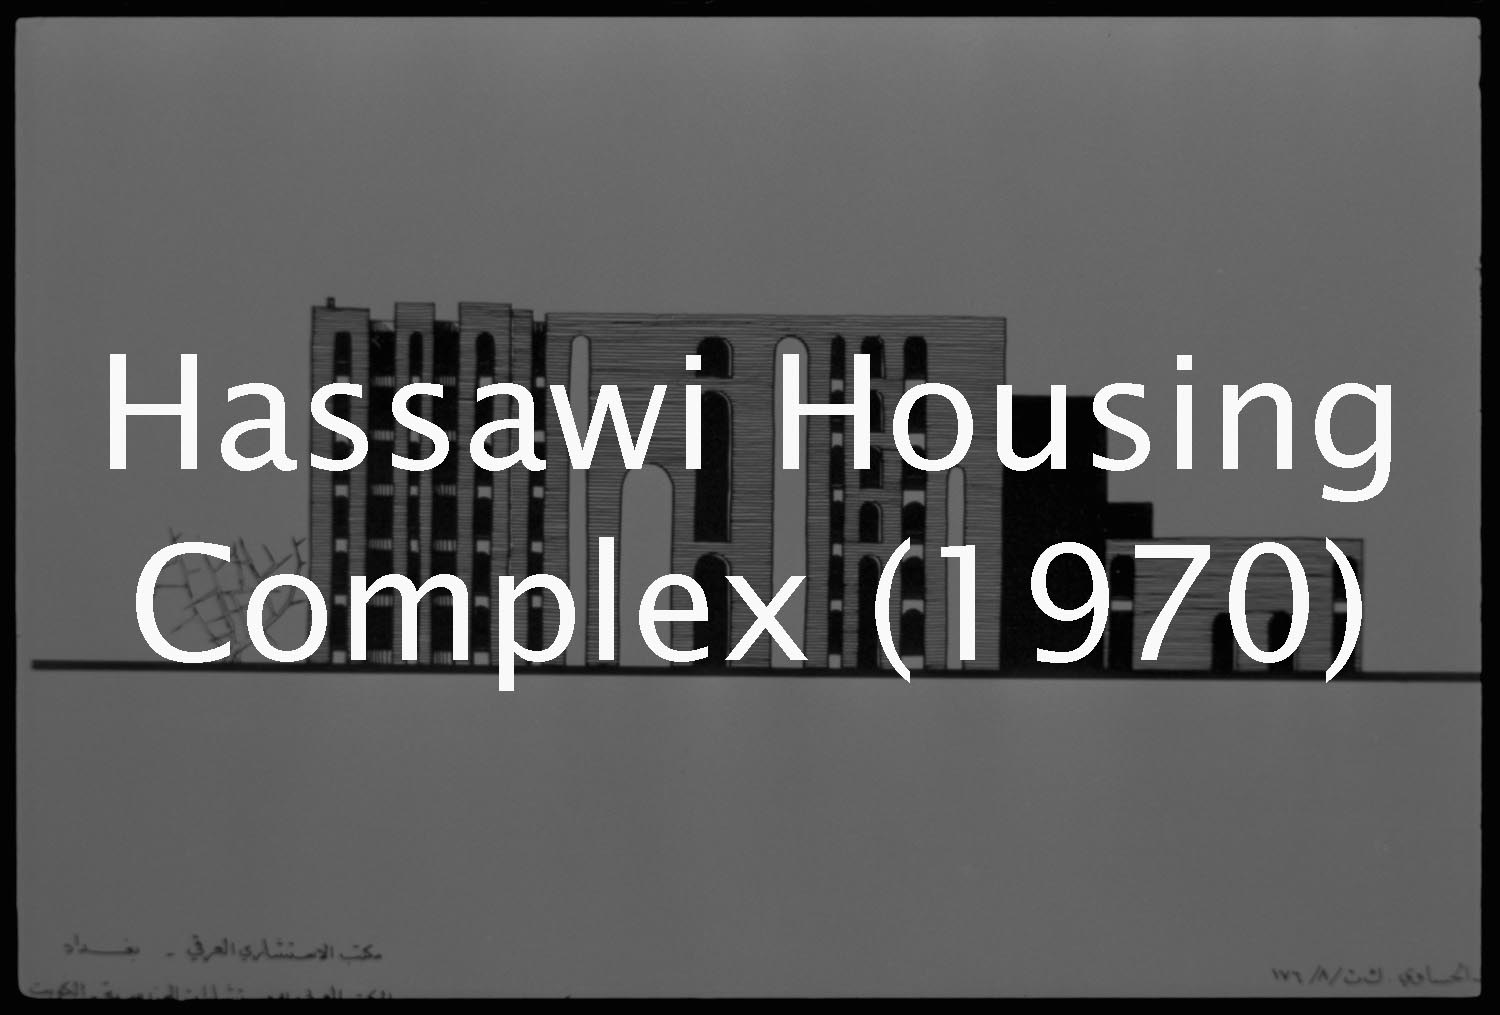 Hassawi Residential Complex (Rifat Chadirji Archive)